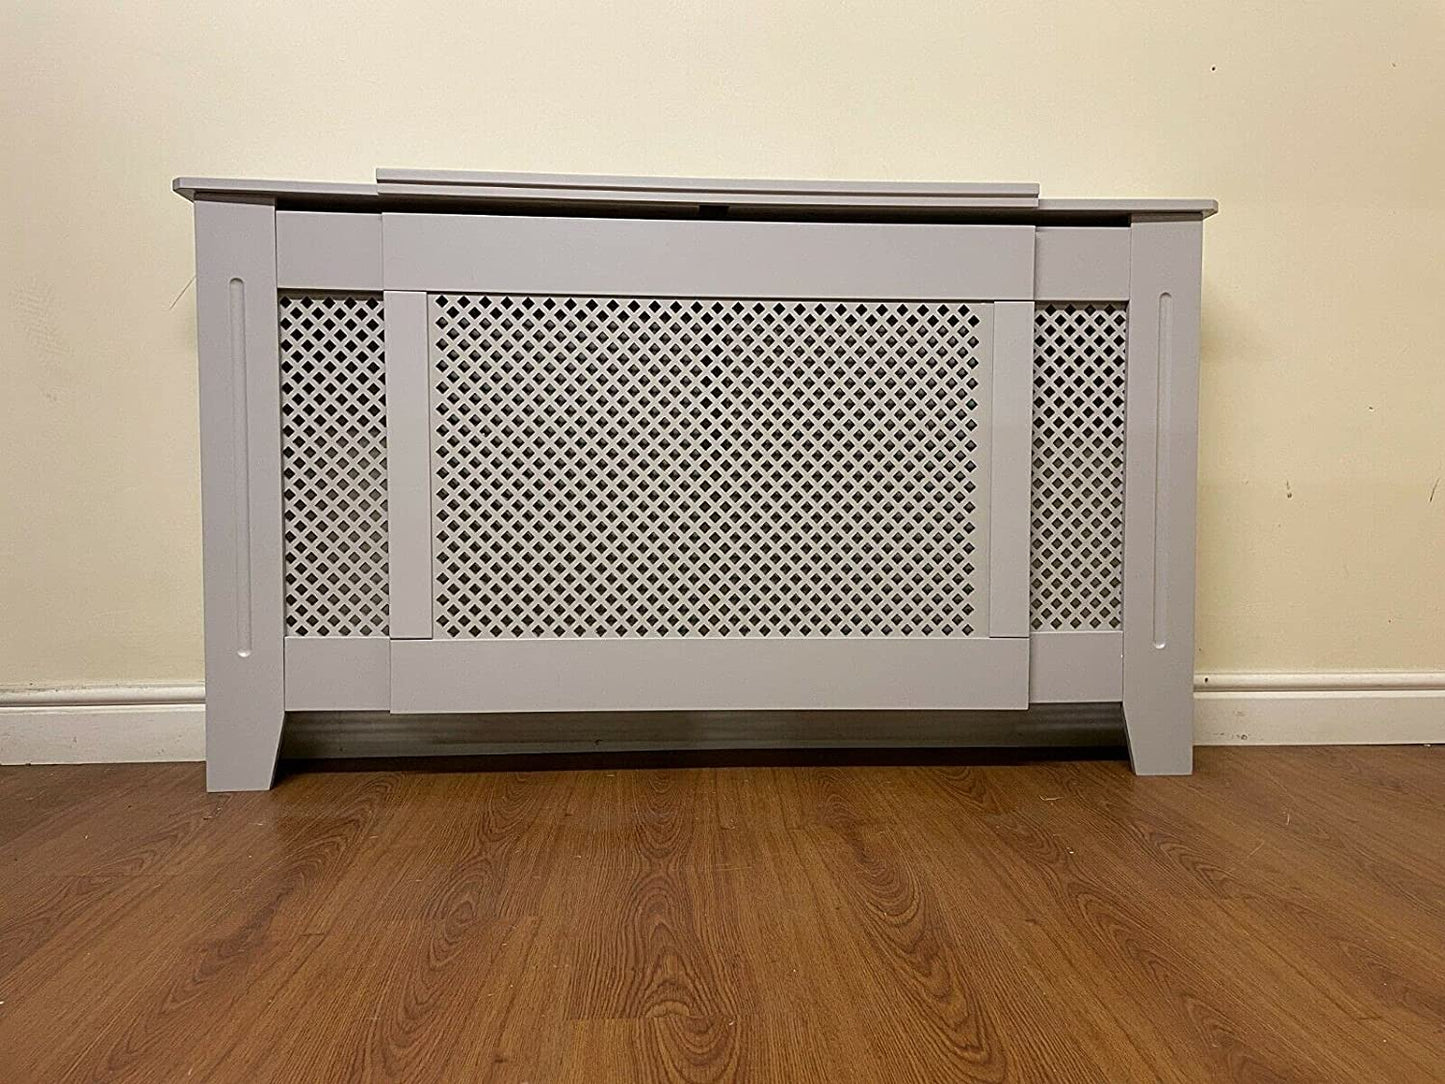 HYGRAD BUILT TO SURVIVE Free Standing Wooden MDF Central Radiator Heater Cover Grill Cabinet Shelf In White & Grey HYGRAD BUILT TO SURVIVE